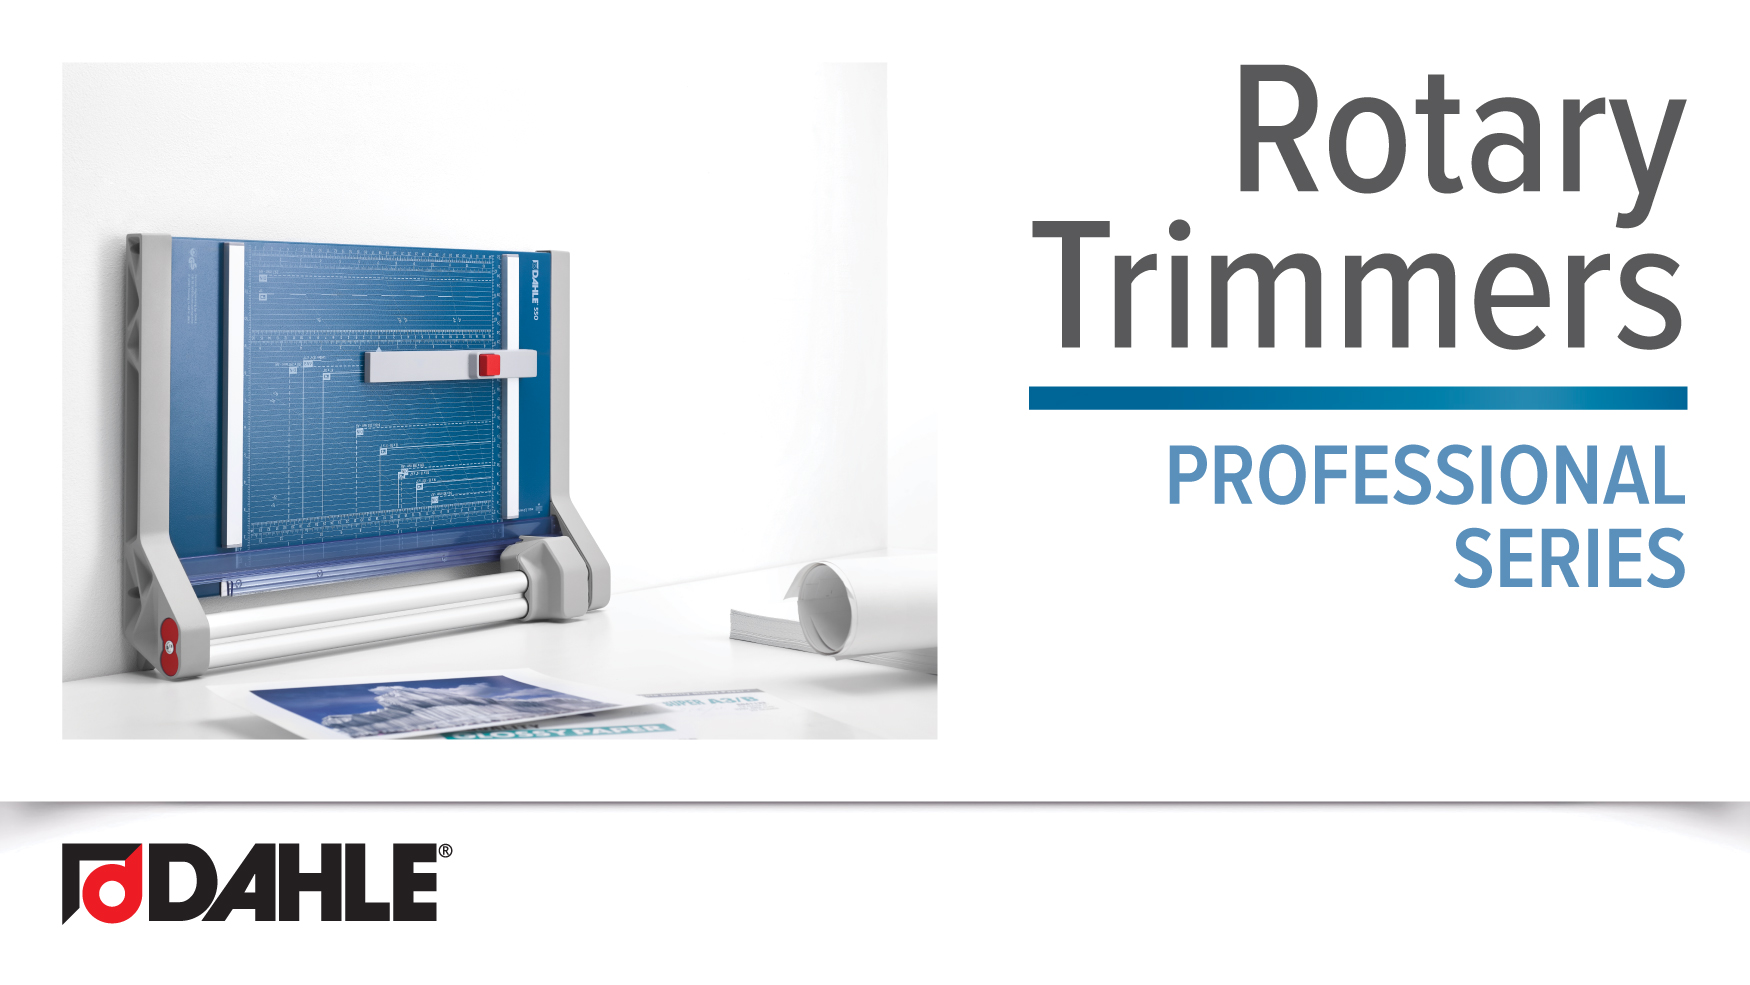 Dahle Professional Rotary Trimmer Series Video